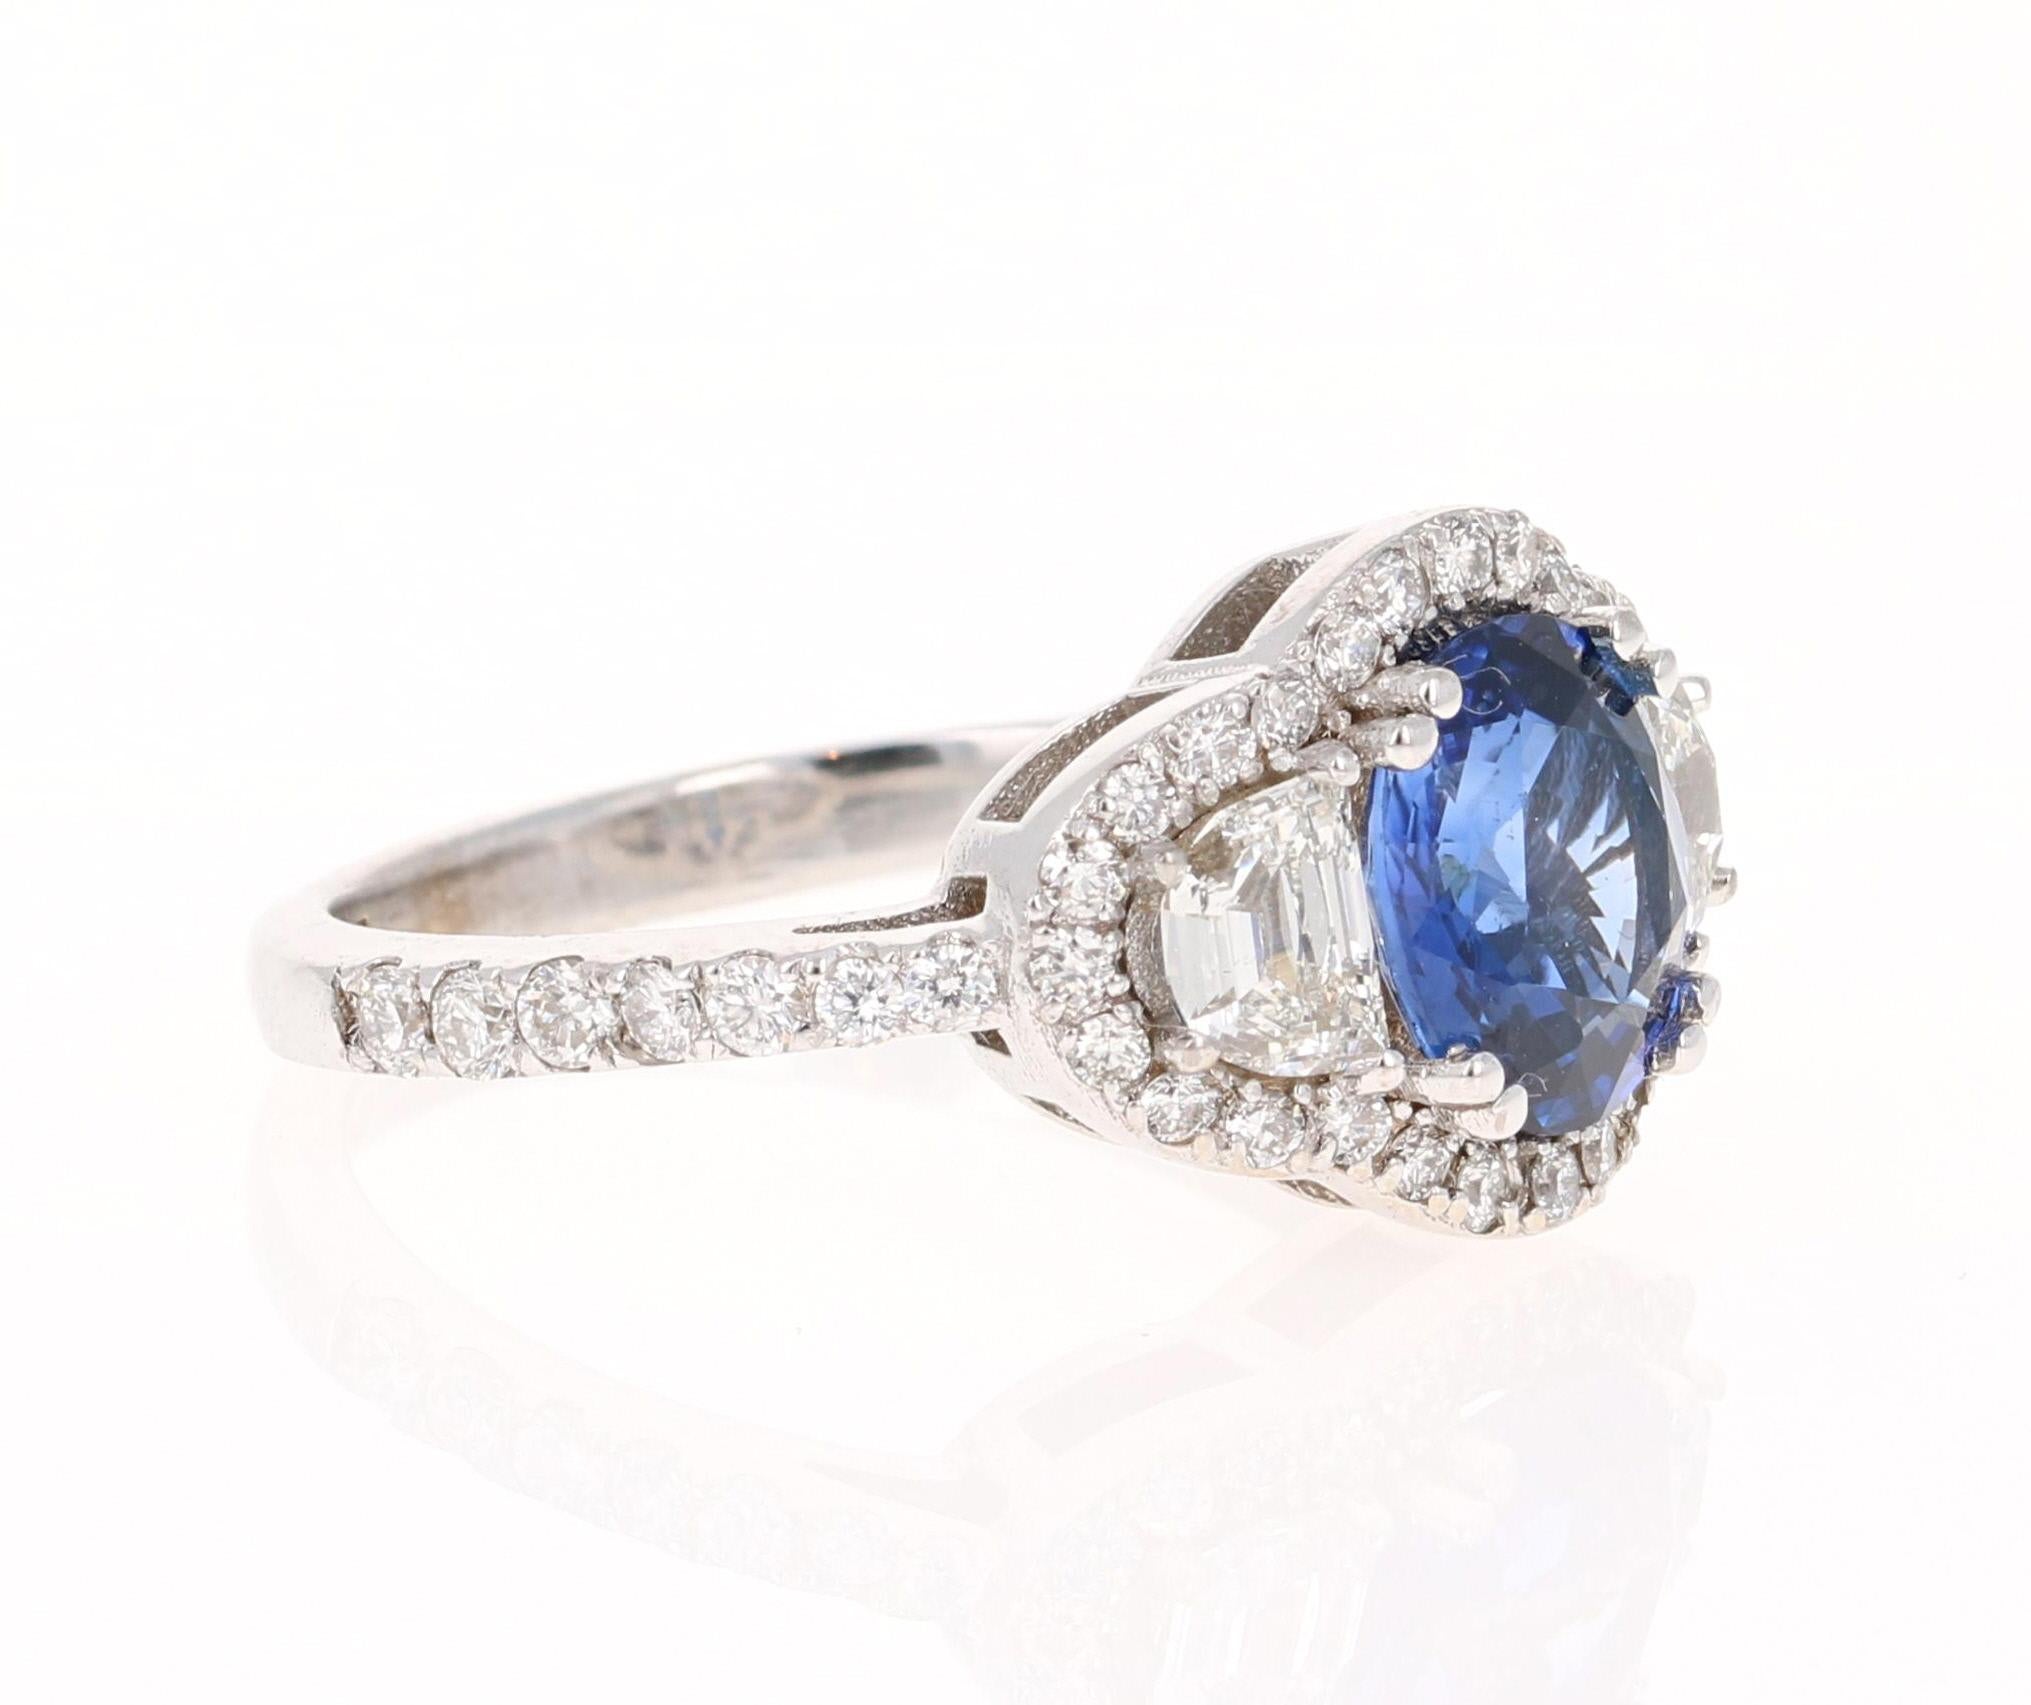 Beautiful Sapphire Diamond ring with an intricate setting! 

This ring has a Blue Sapphire that weighs 1.95 Carats and is GIA Certified. The Sapphire is a natural Blue Oval Cut with NO indications of heating. The GIA Certificate Number is: